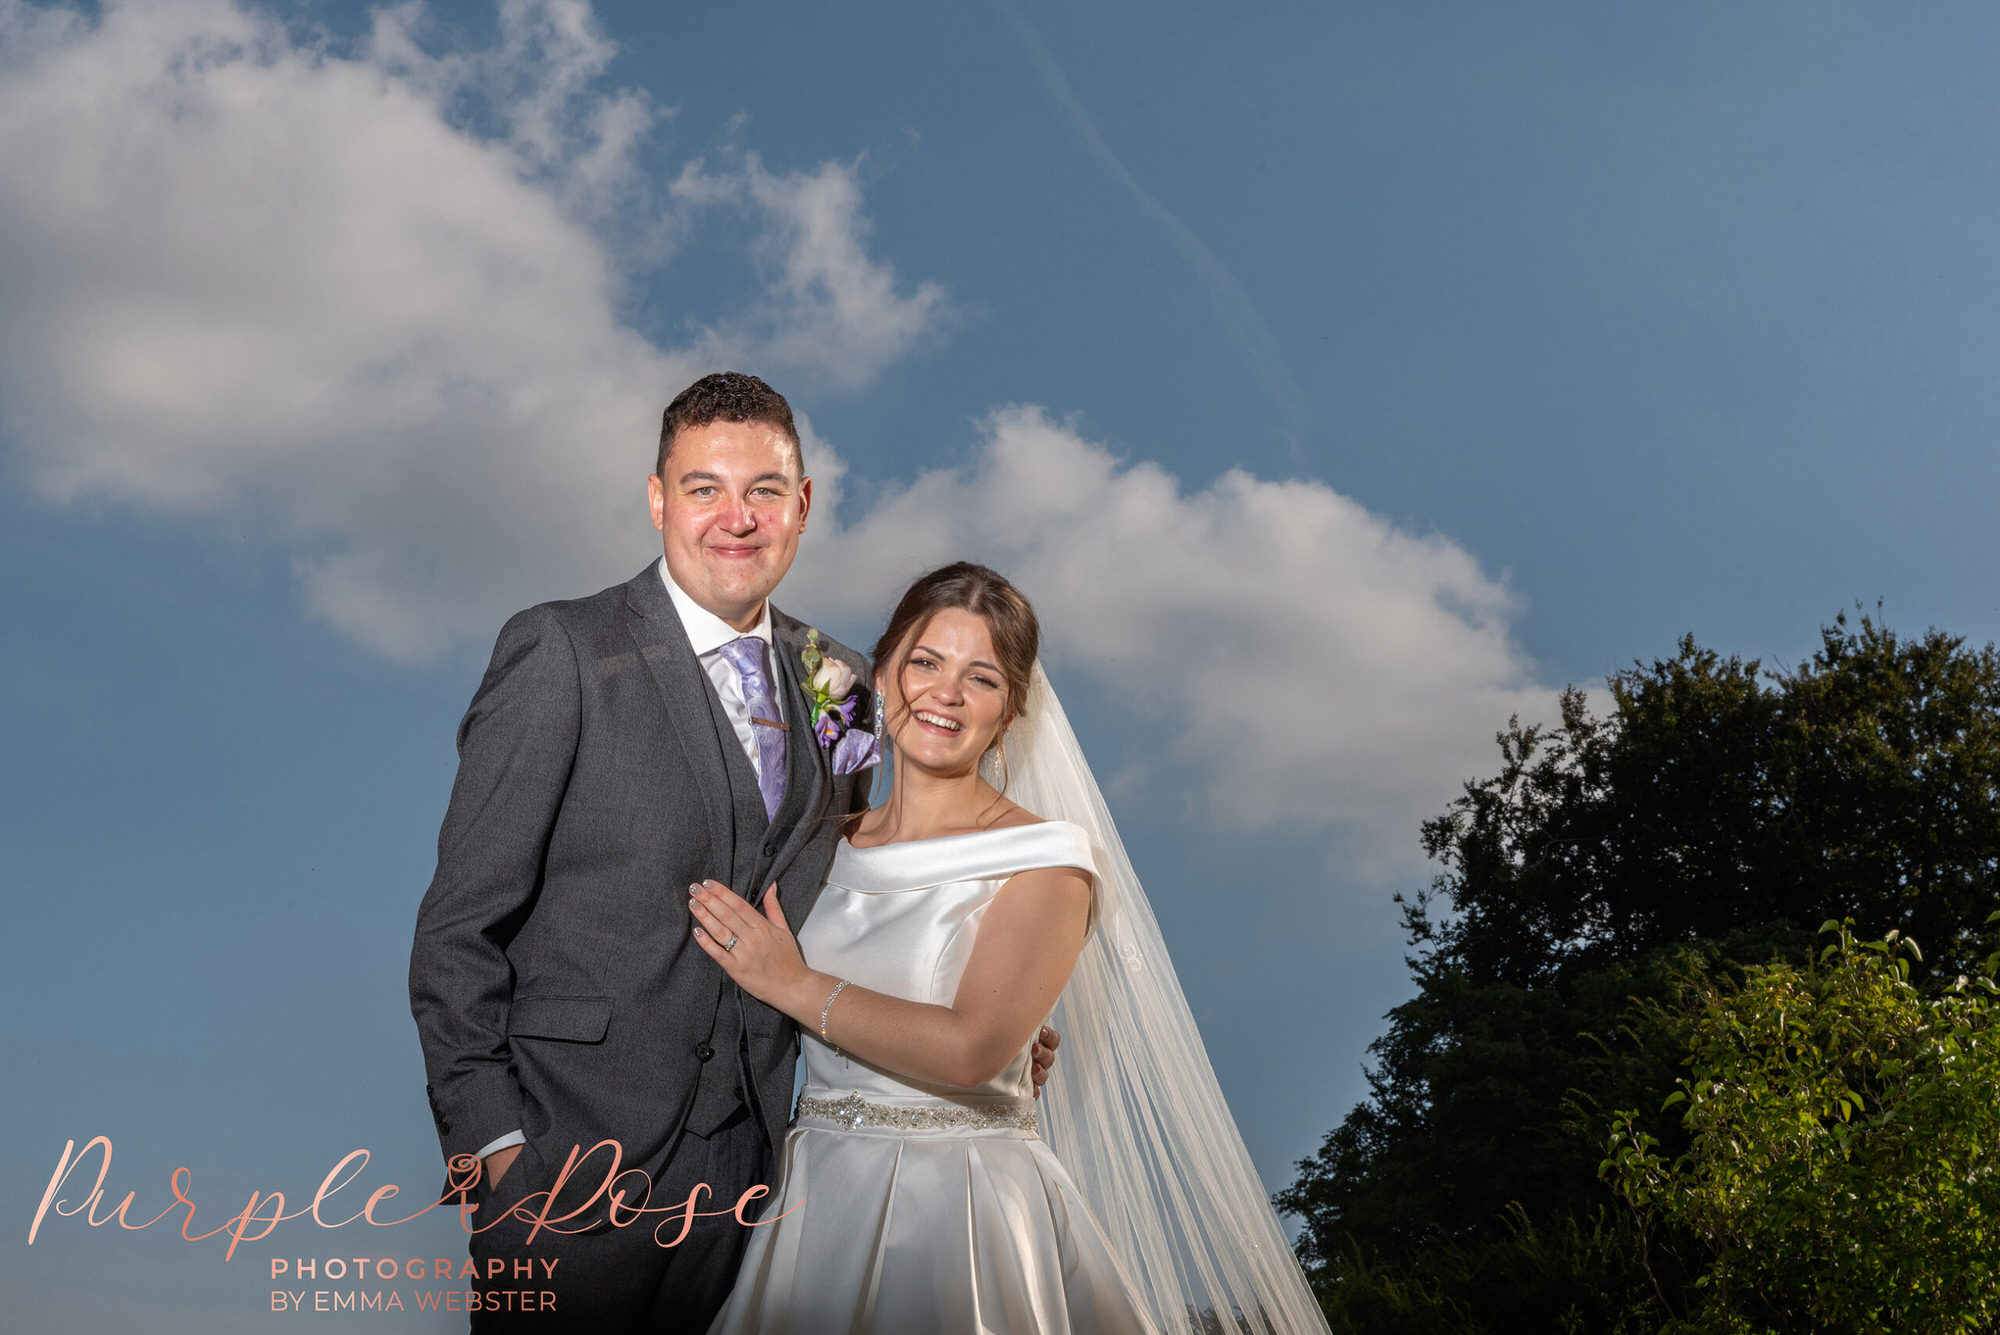 Bride and groom smiling in front of blue sky